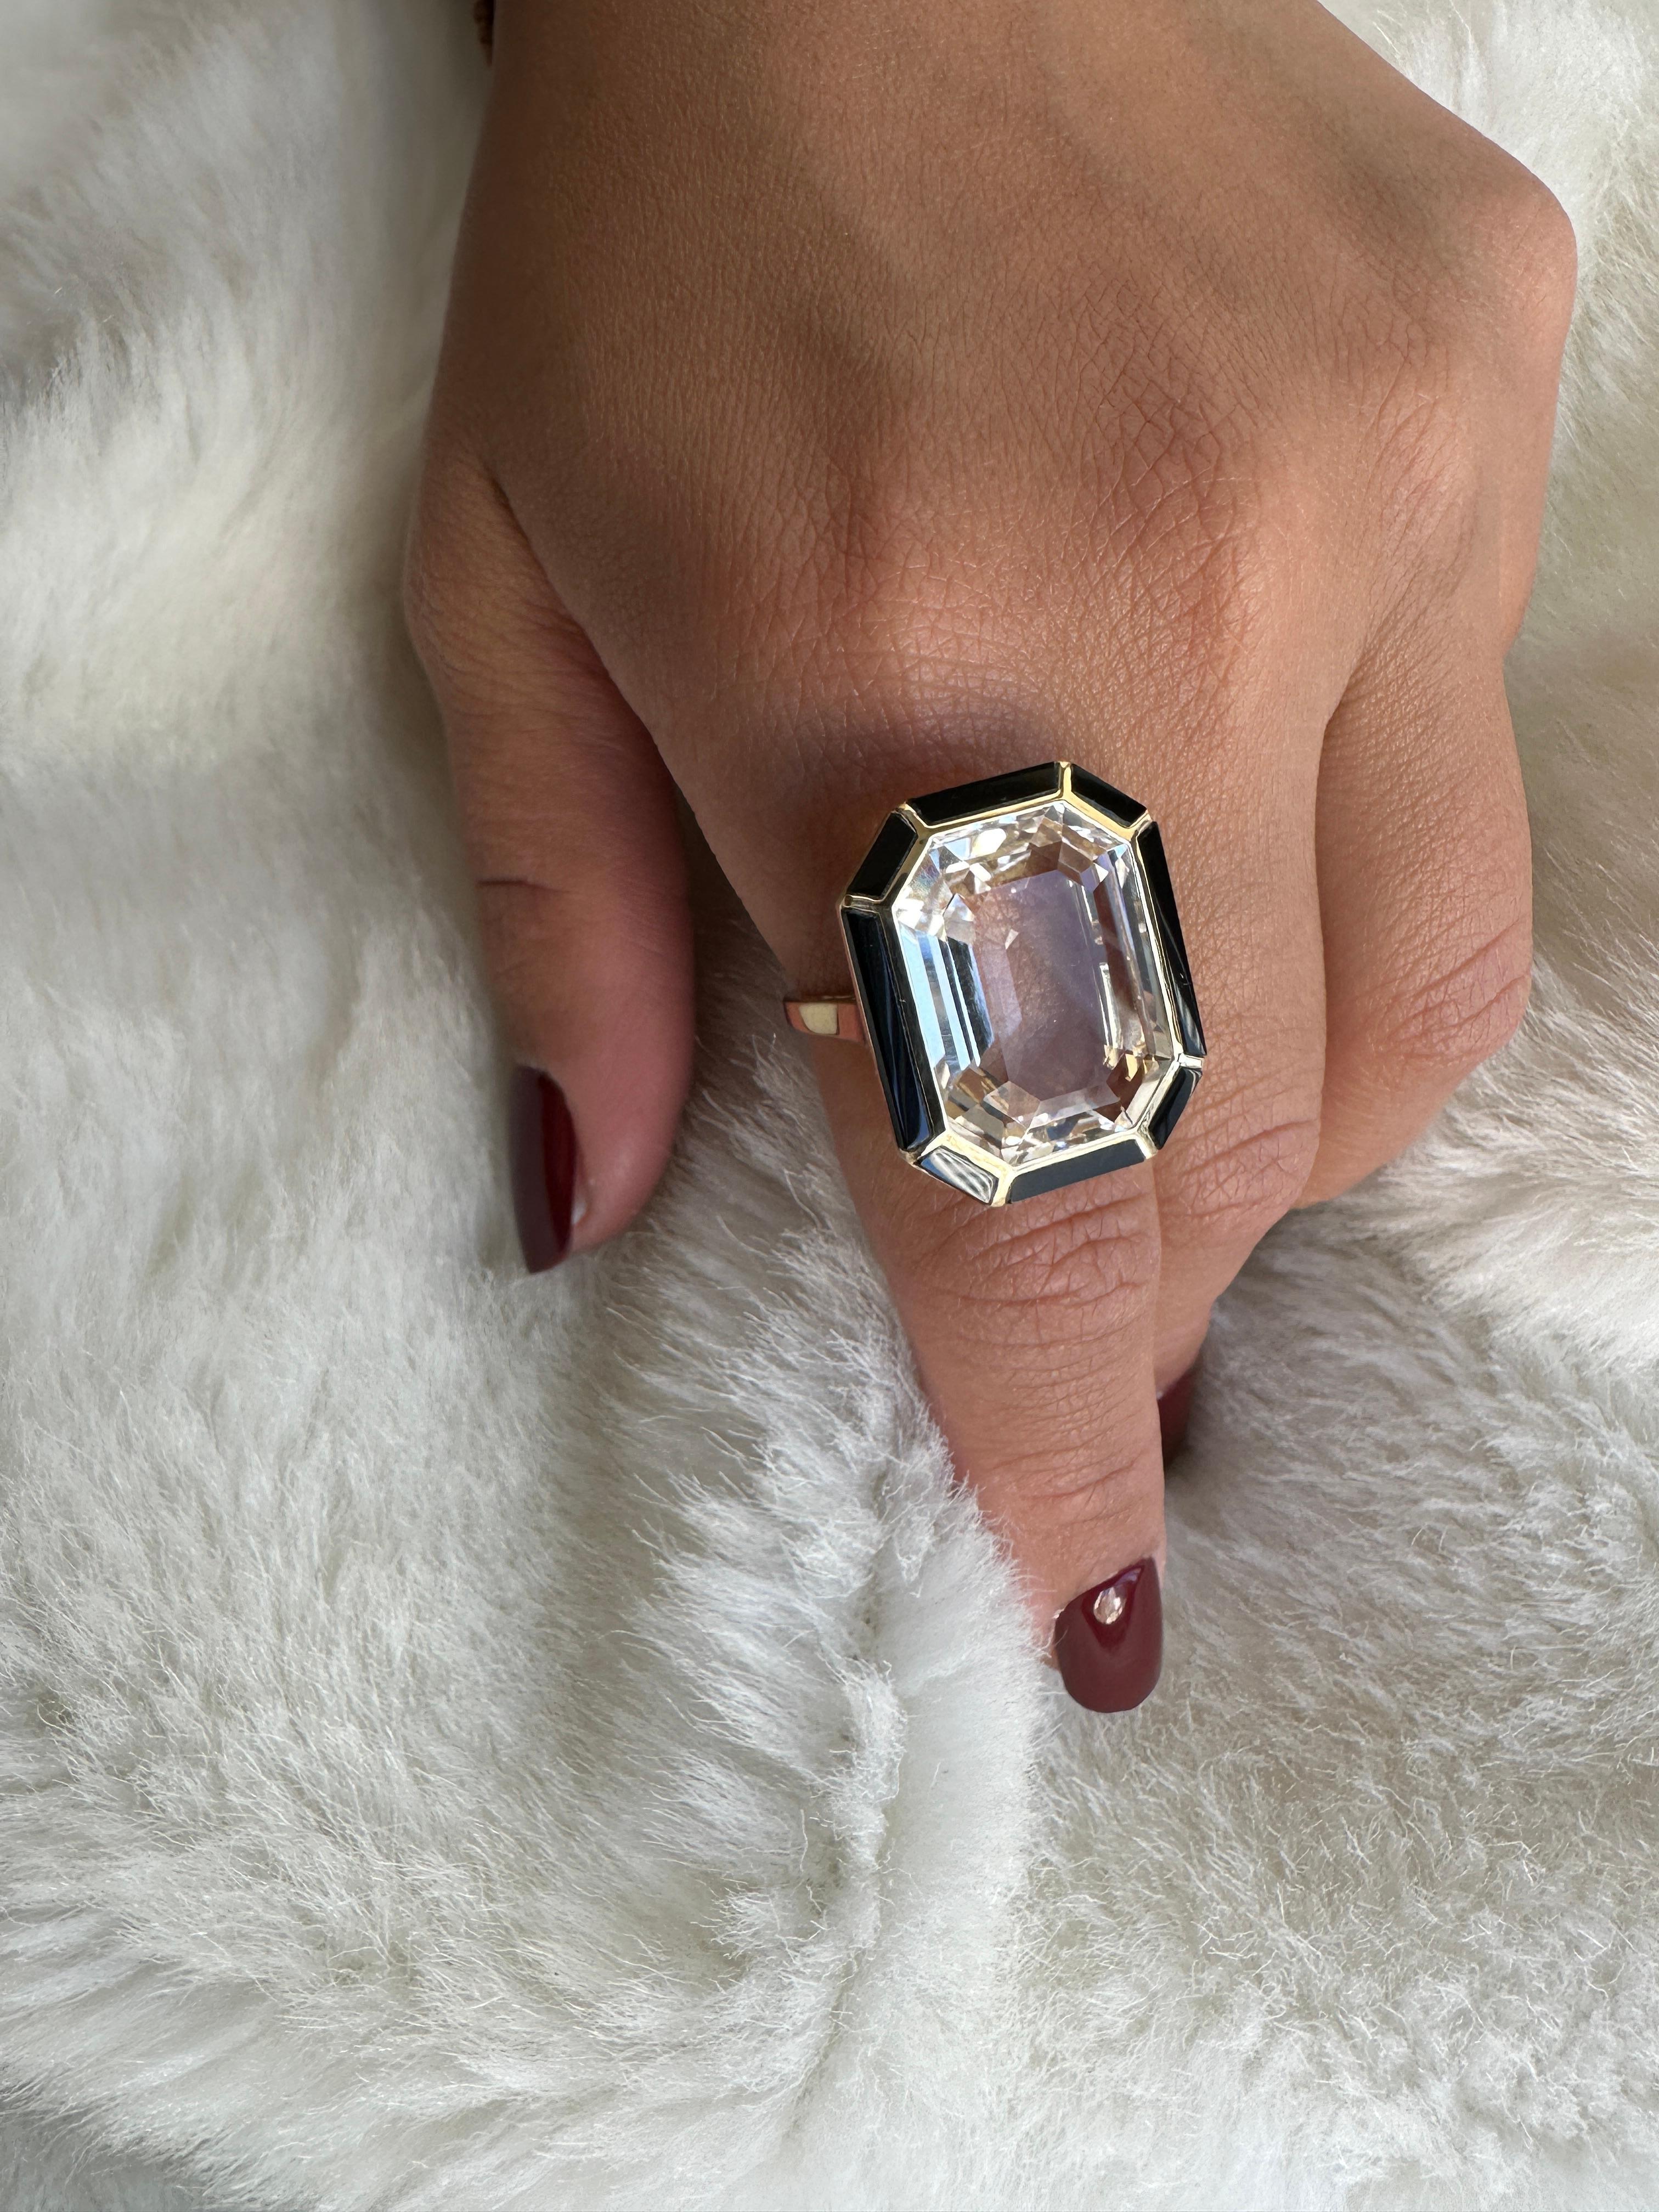 Rock Crystal and Onyx Emerald Cut Ring in 18K Yellow Gold, from ''Mélange'' Collection.

Beautifully crafted, these special pieces from Goshwara are not to be missed!

* Gemstone: 100% Earth Mined 
* Approx. gemstone Weight: 16 Carats (Rock